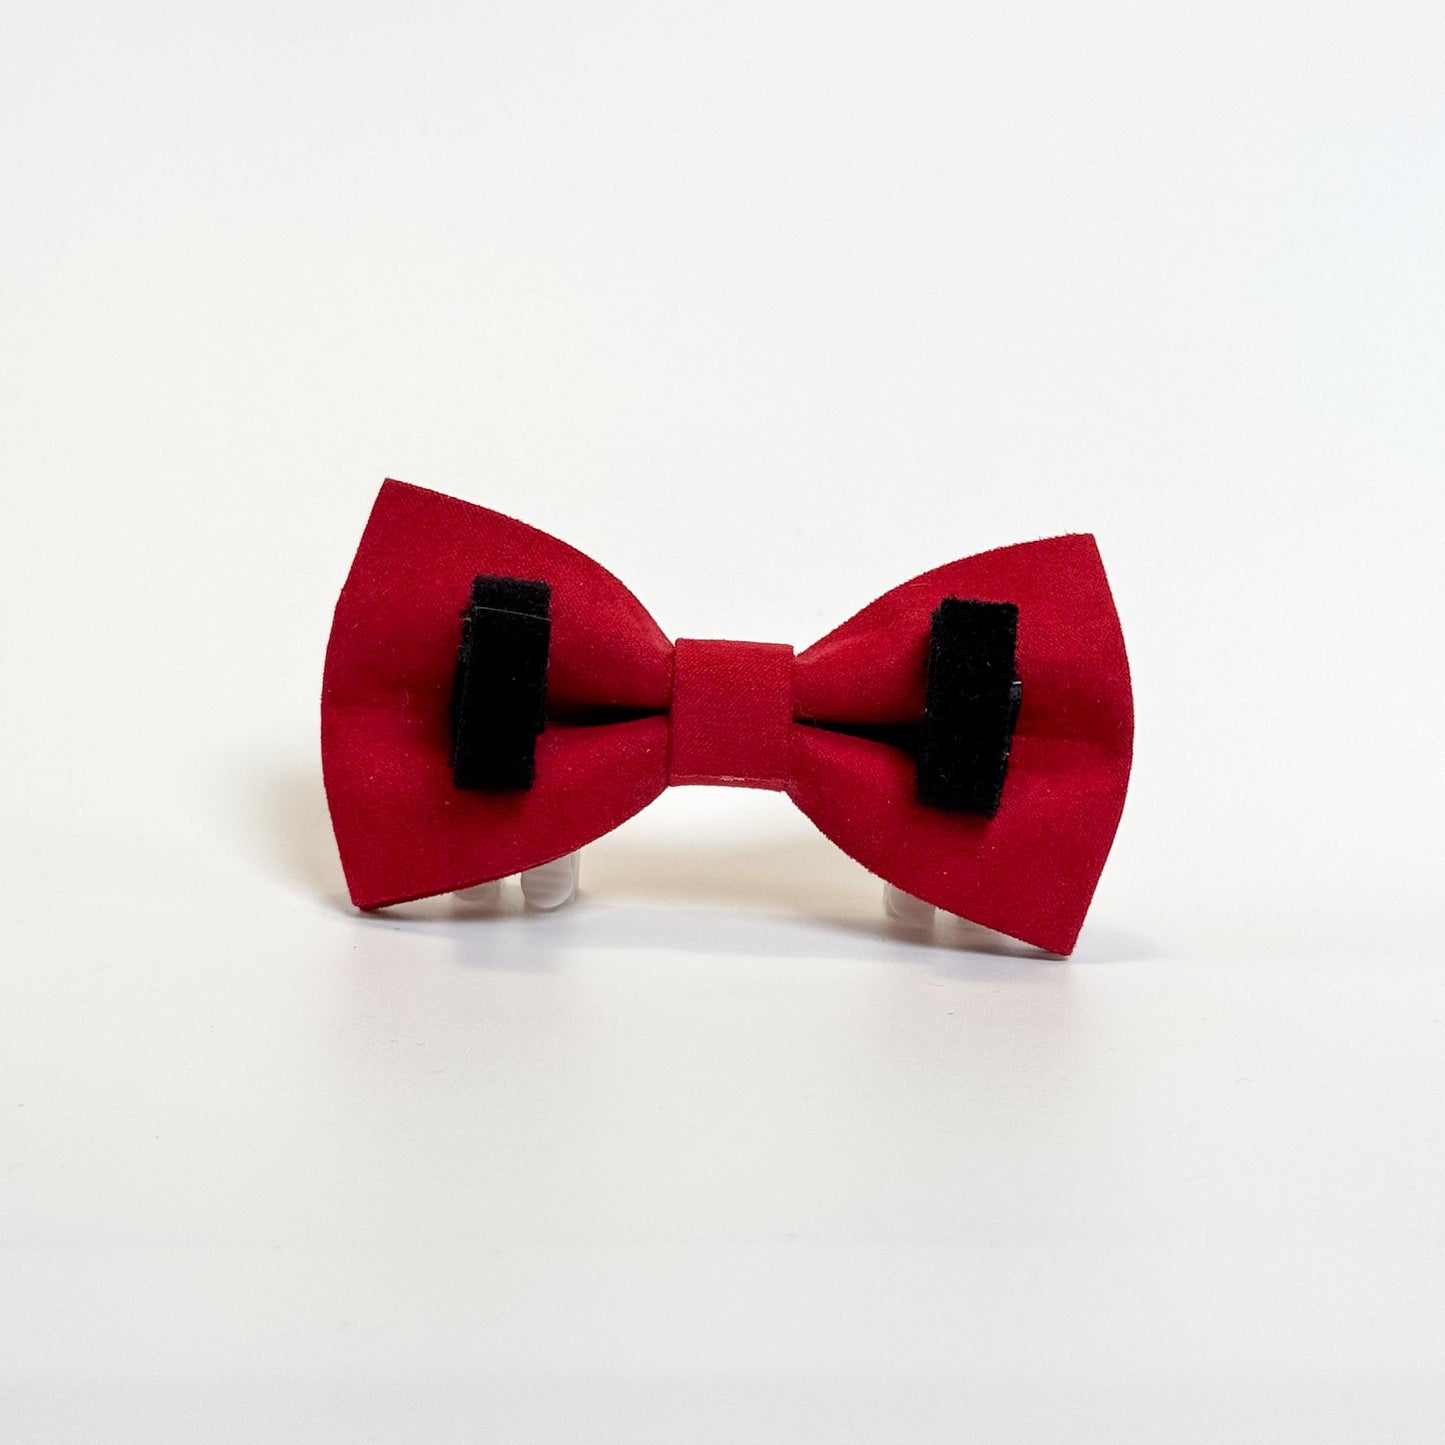 Fire Engine Red Bow Tie - Sam and Dot